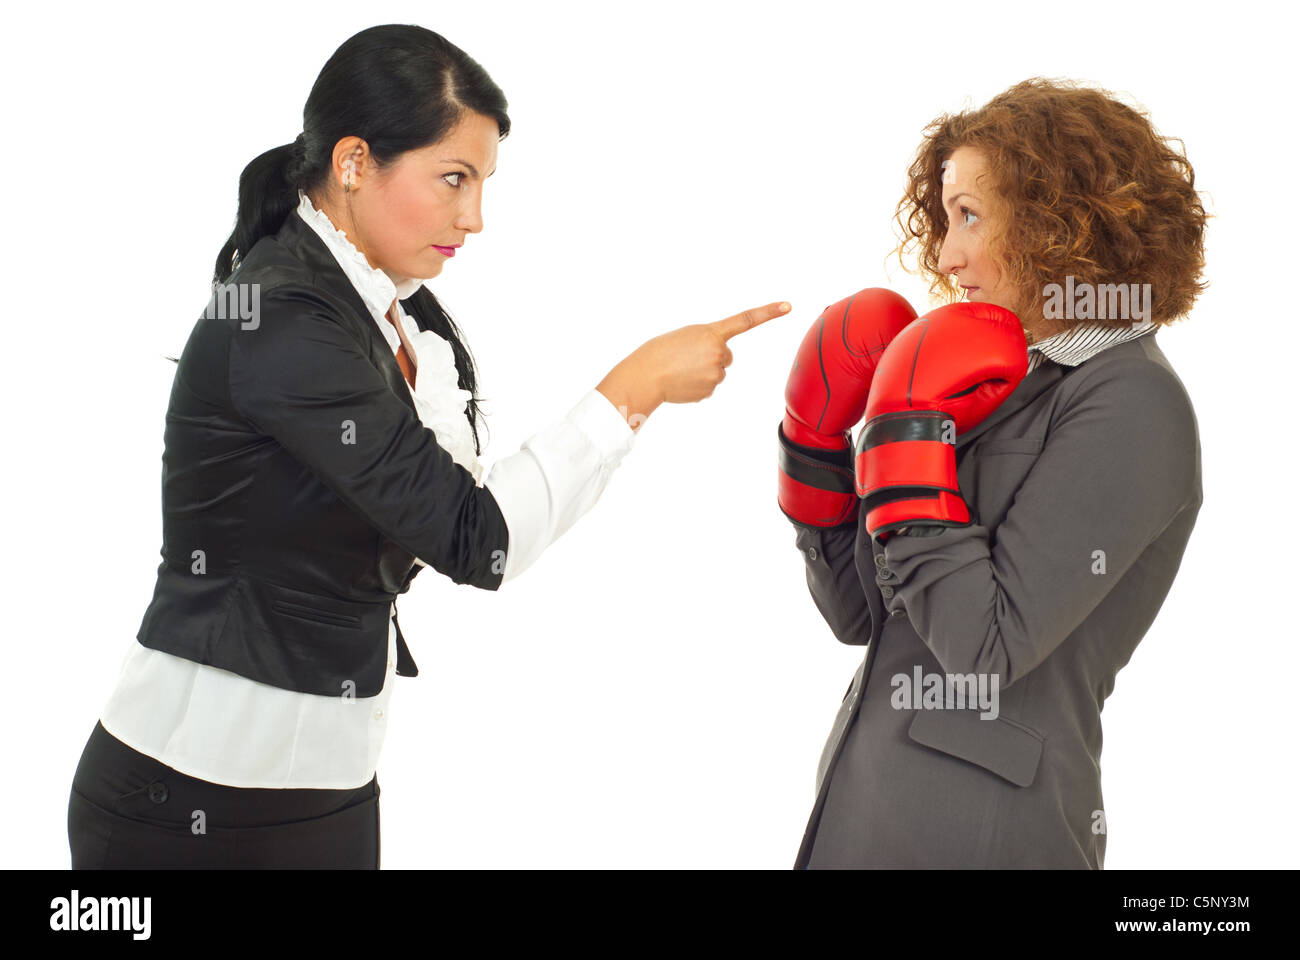 Manager woman pointing and accusing and employee woman who defending with boxing gloves isolated on white background Stock Photo